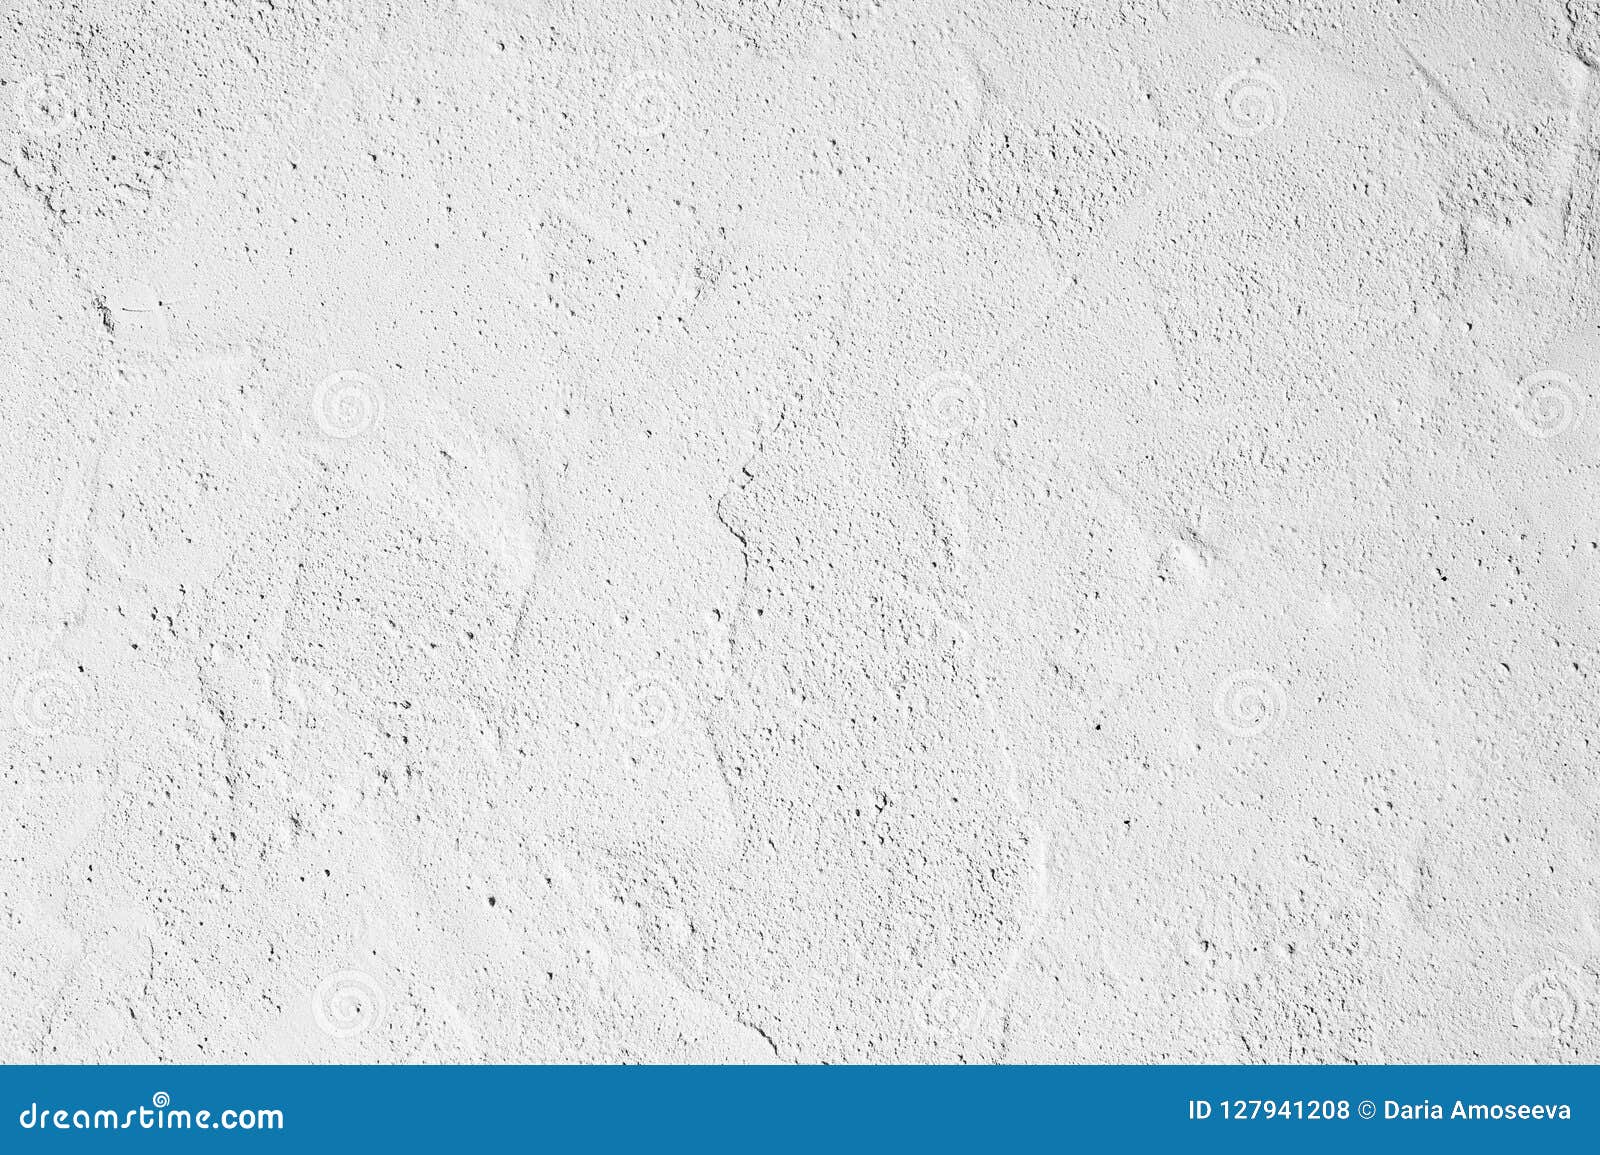 Plaster Texture Seamless Stock Illustrations 4 933 Plaster Texture Seamless Stock Illustrations Vectors Clipart Dreamstime